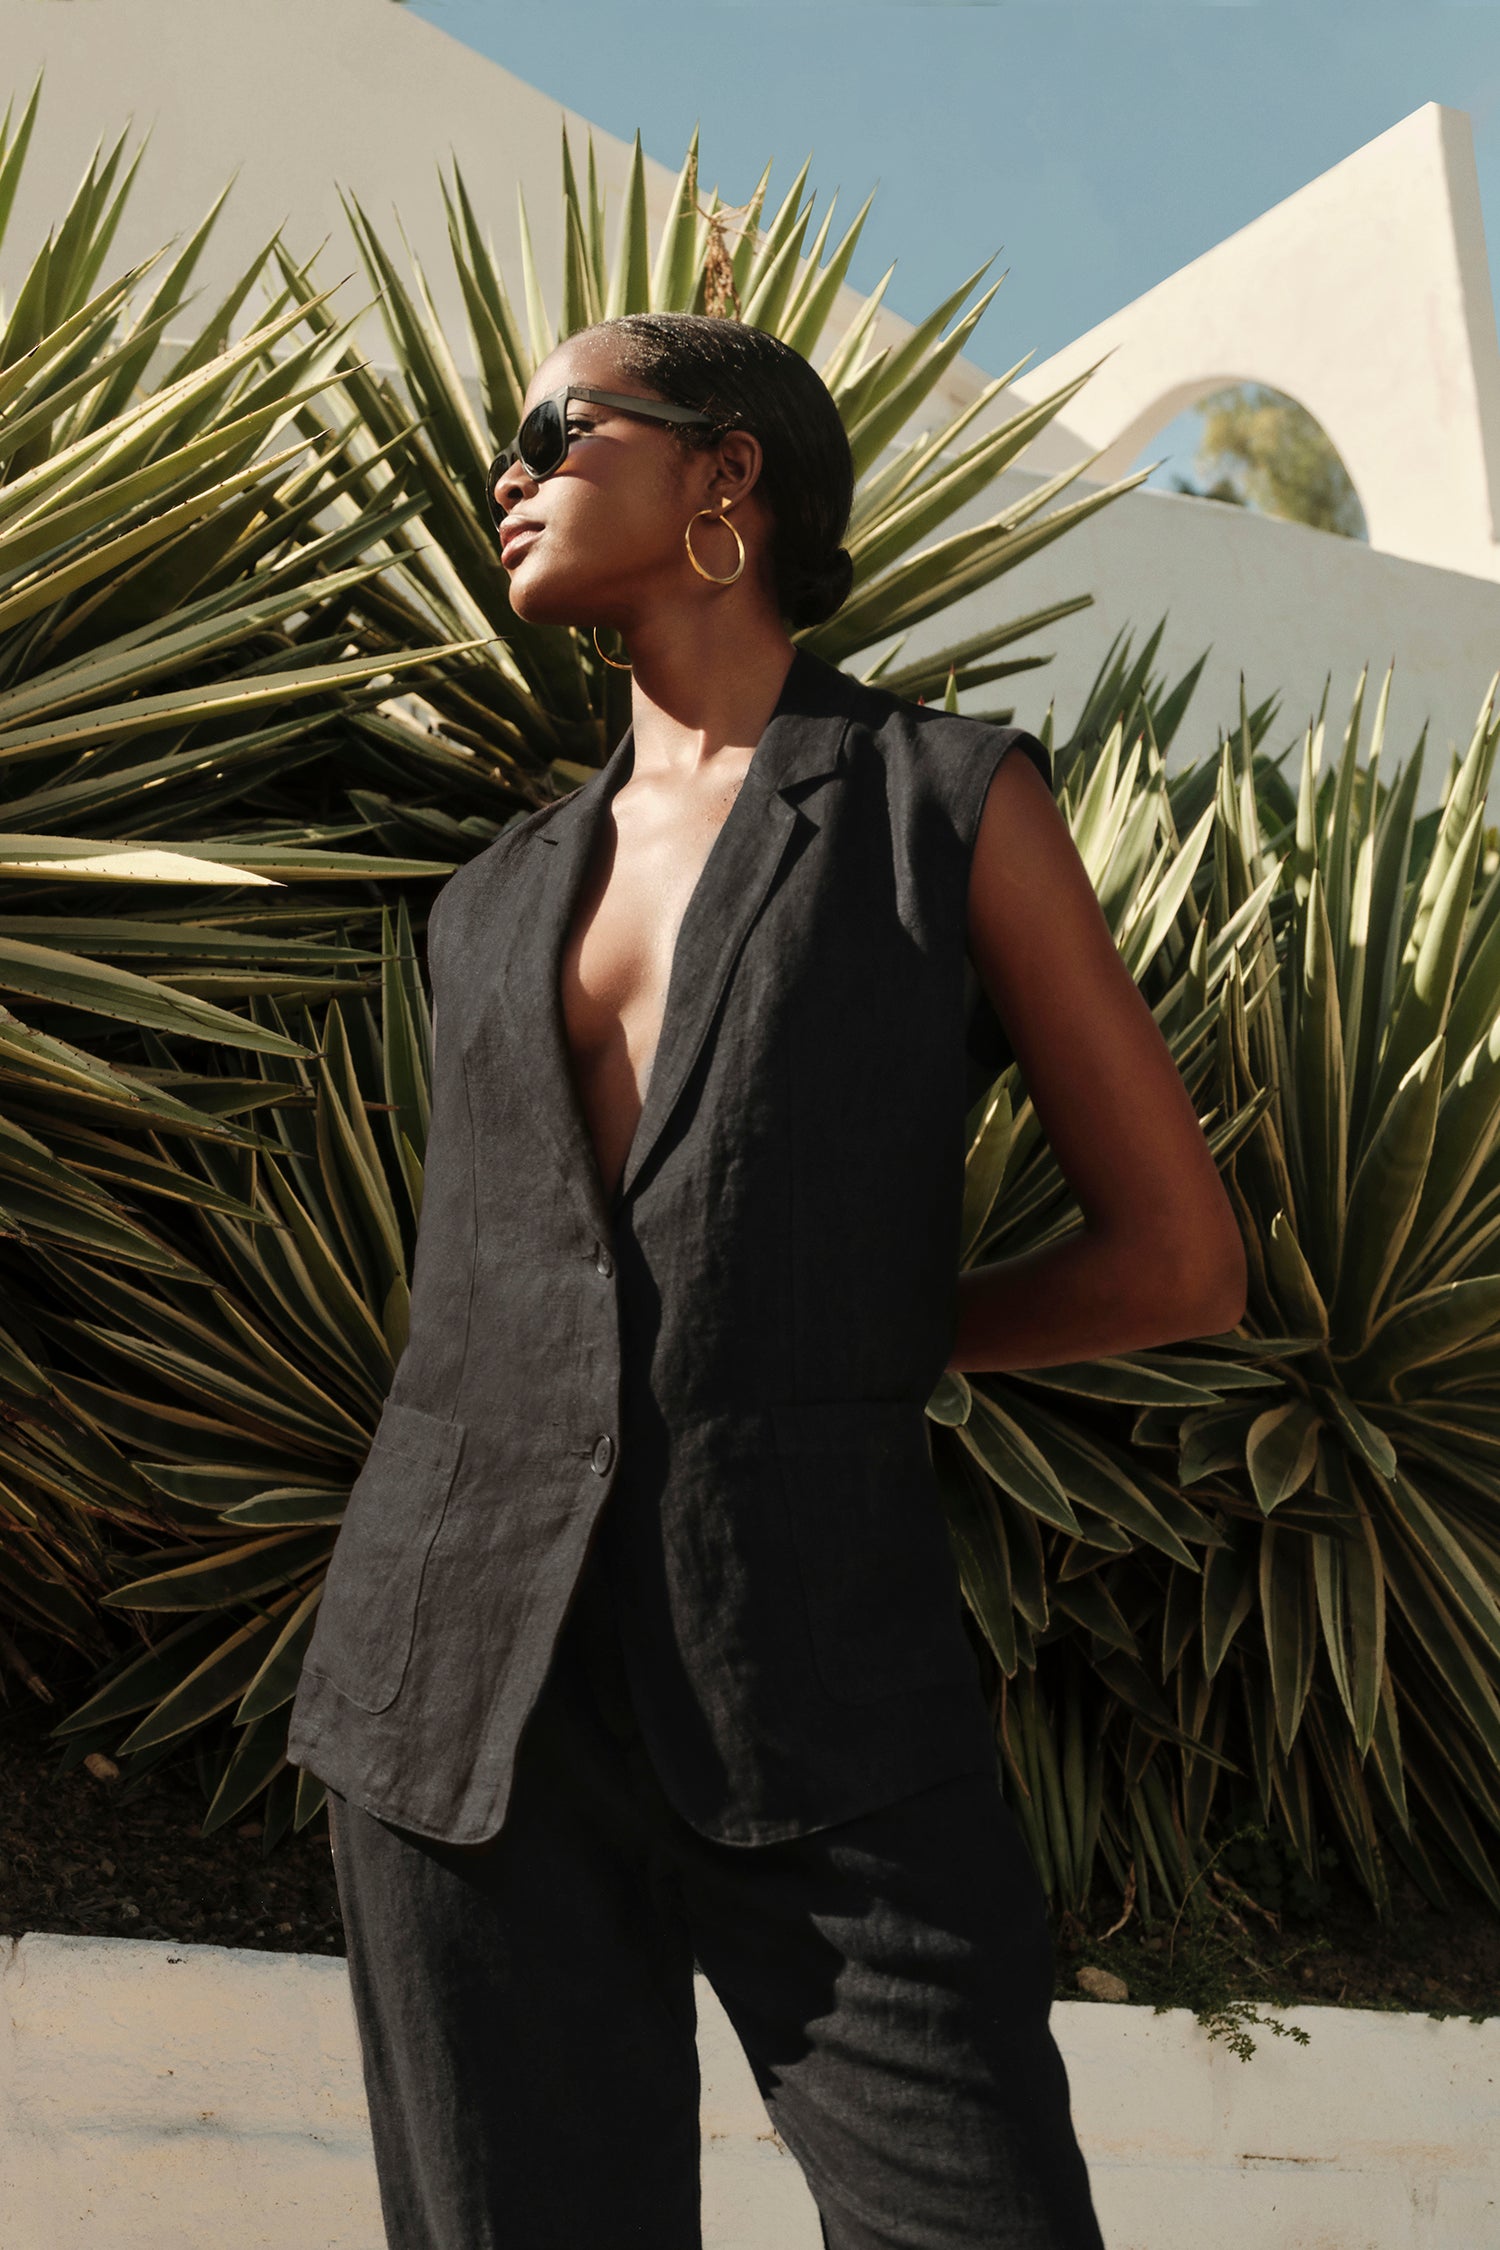   A stylish woman in a black BETHAN HEAVY LINEN SLEEVELESS BLAZER by Velvet by Graham & Spencer stands confidently against a background of sharp green leaves, wearing sunglasses and hoop earrings. 